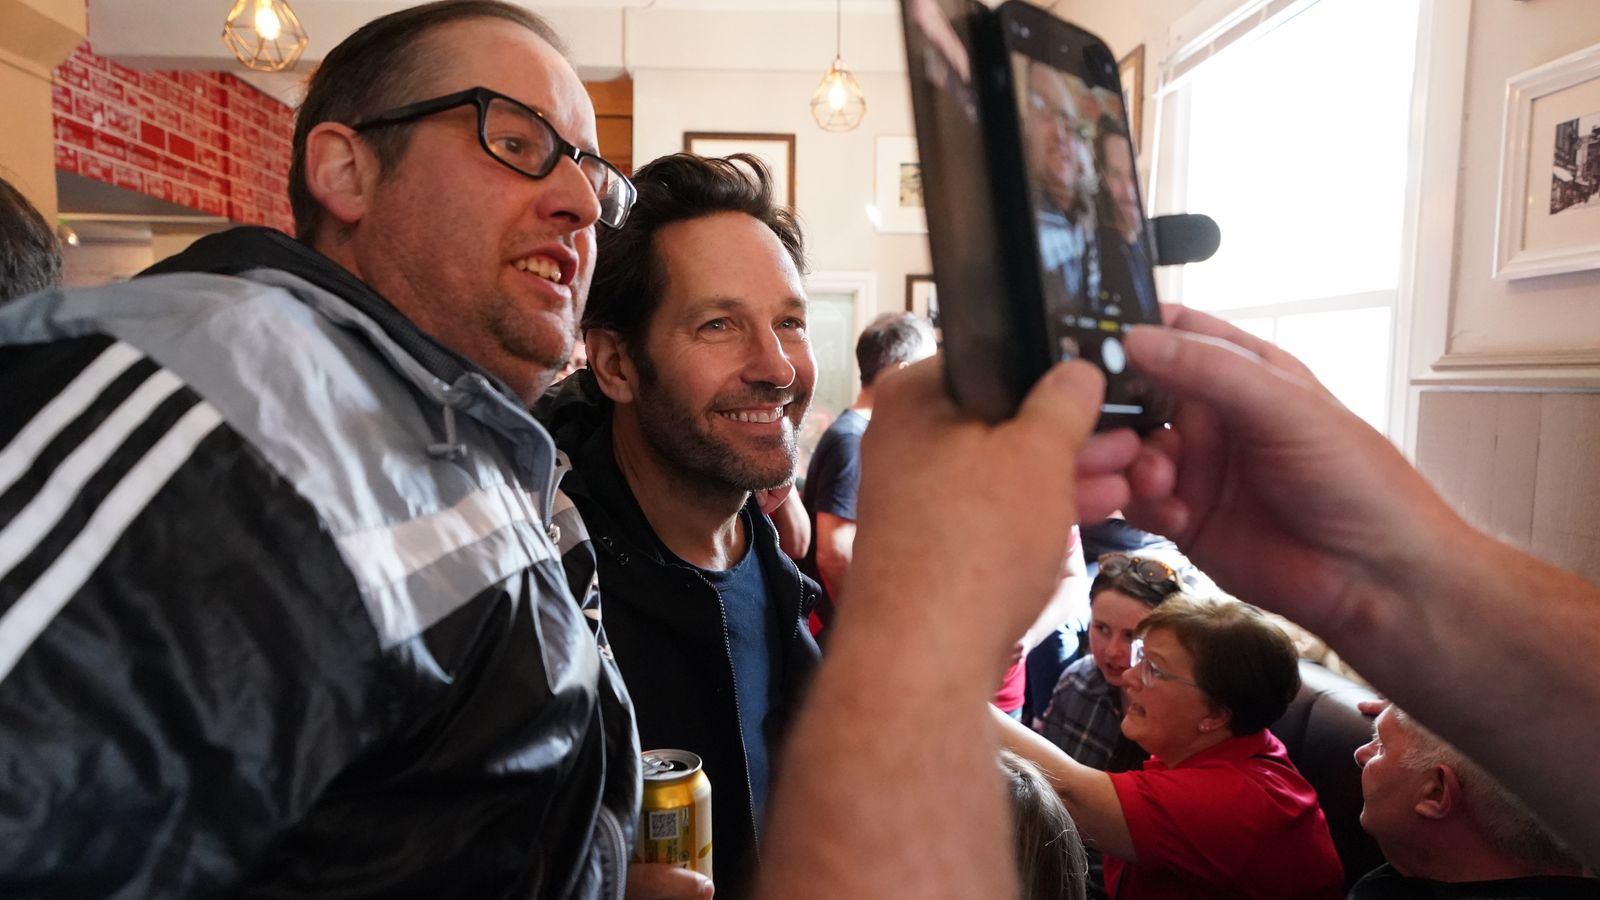 Wrexham: Hollywood star Paul Rudd drinks beer and sings with fans ahead of crunch National League match 